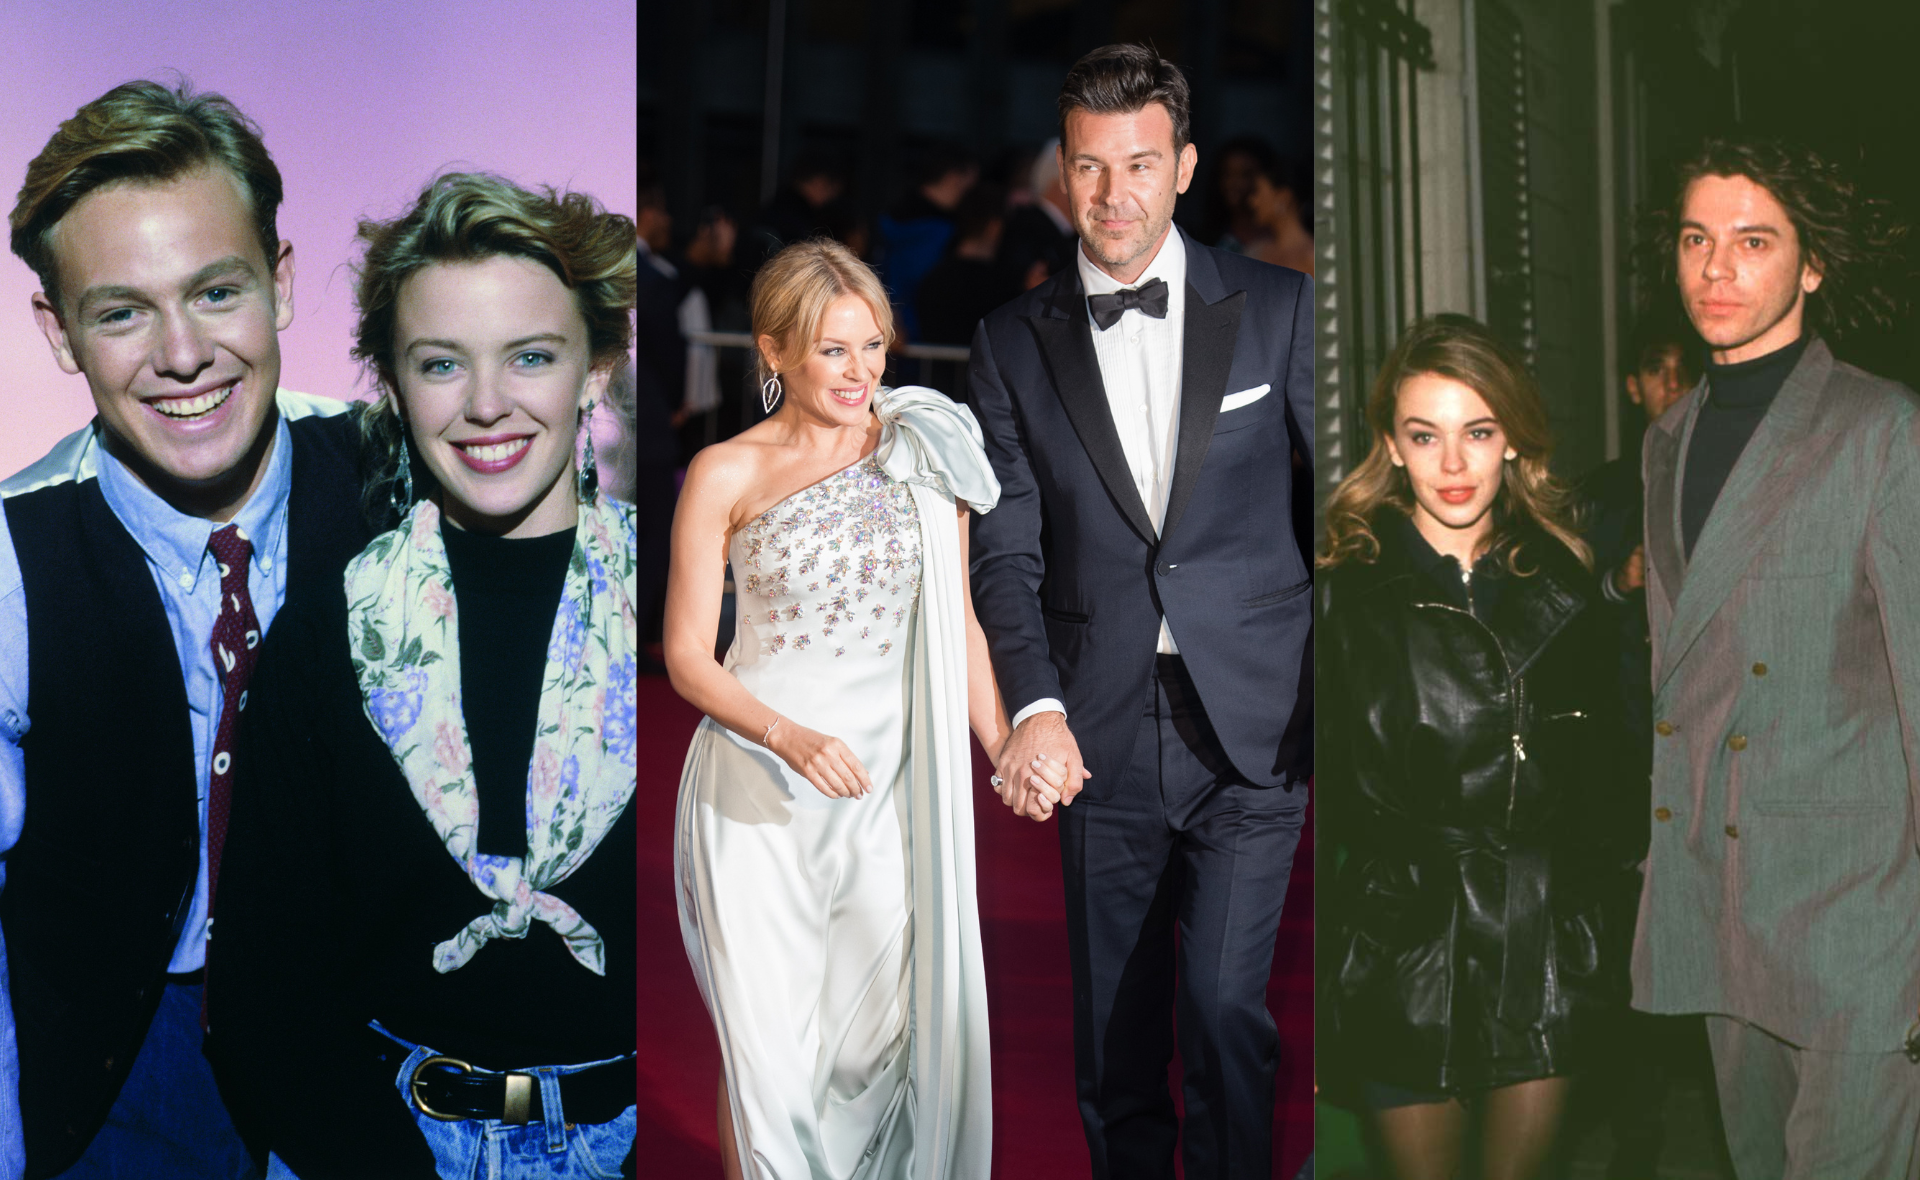 Love at first sight: Recap Kylie Minogue’s star-studded relationship history